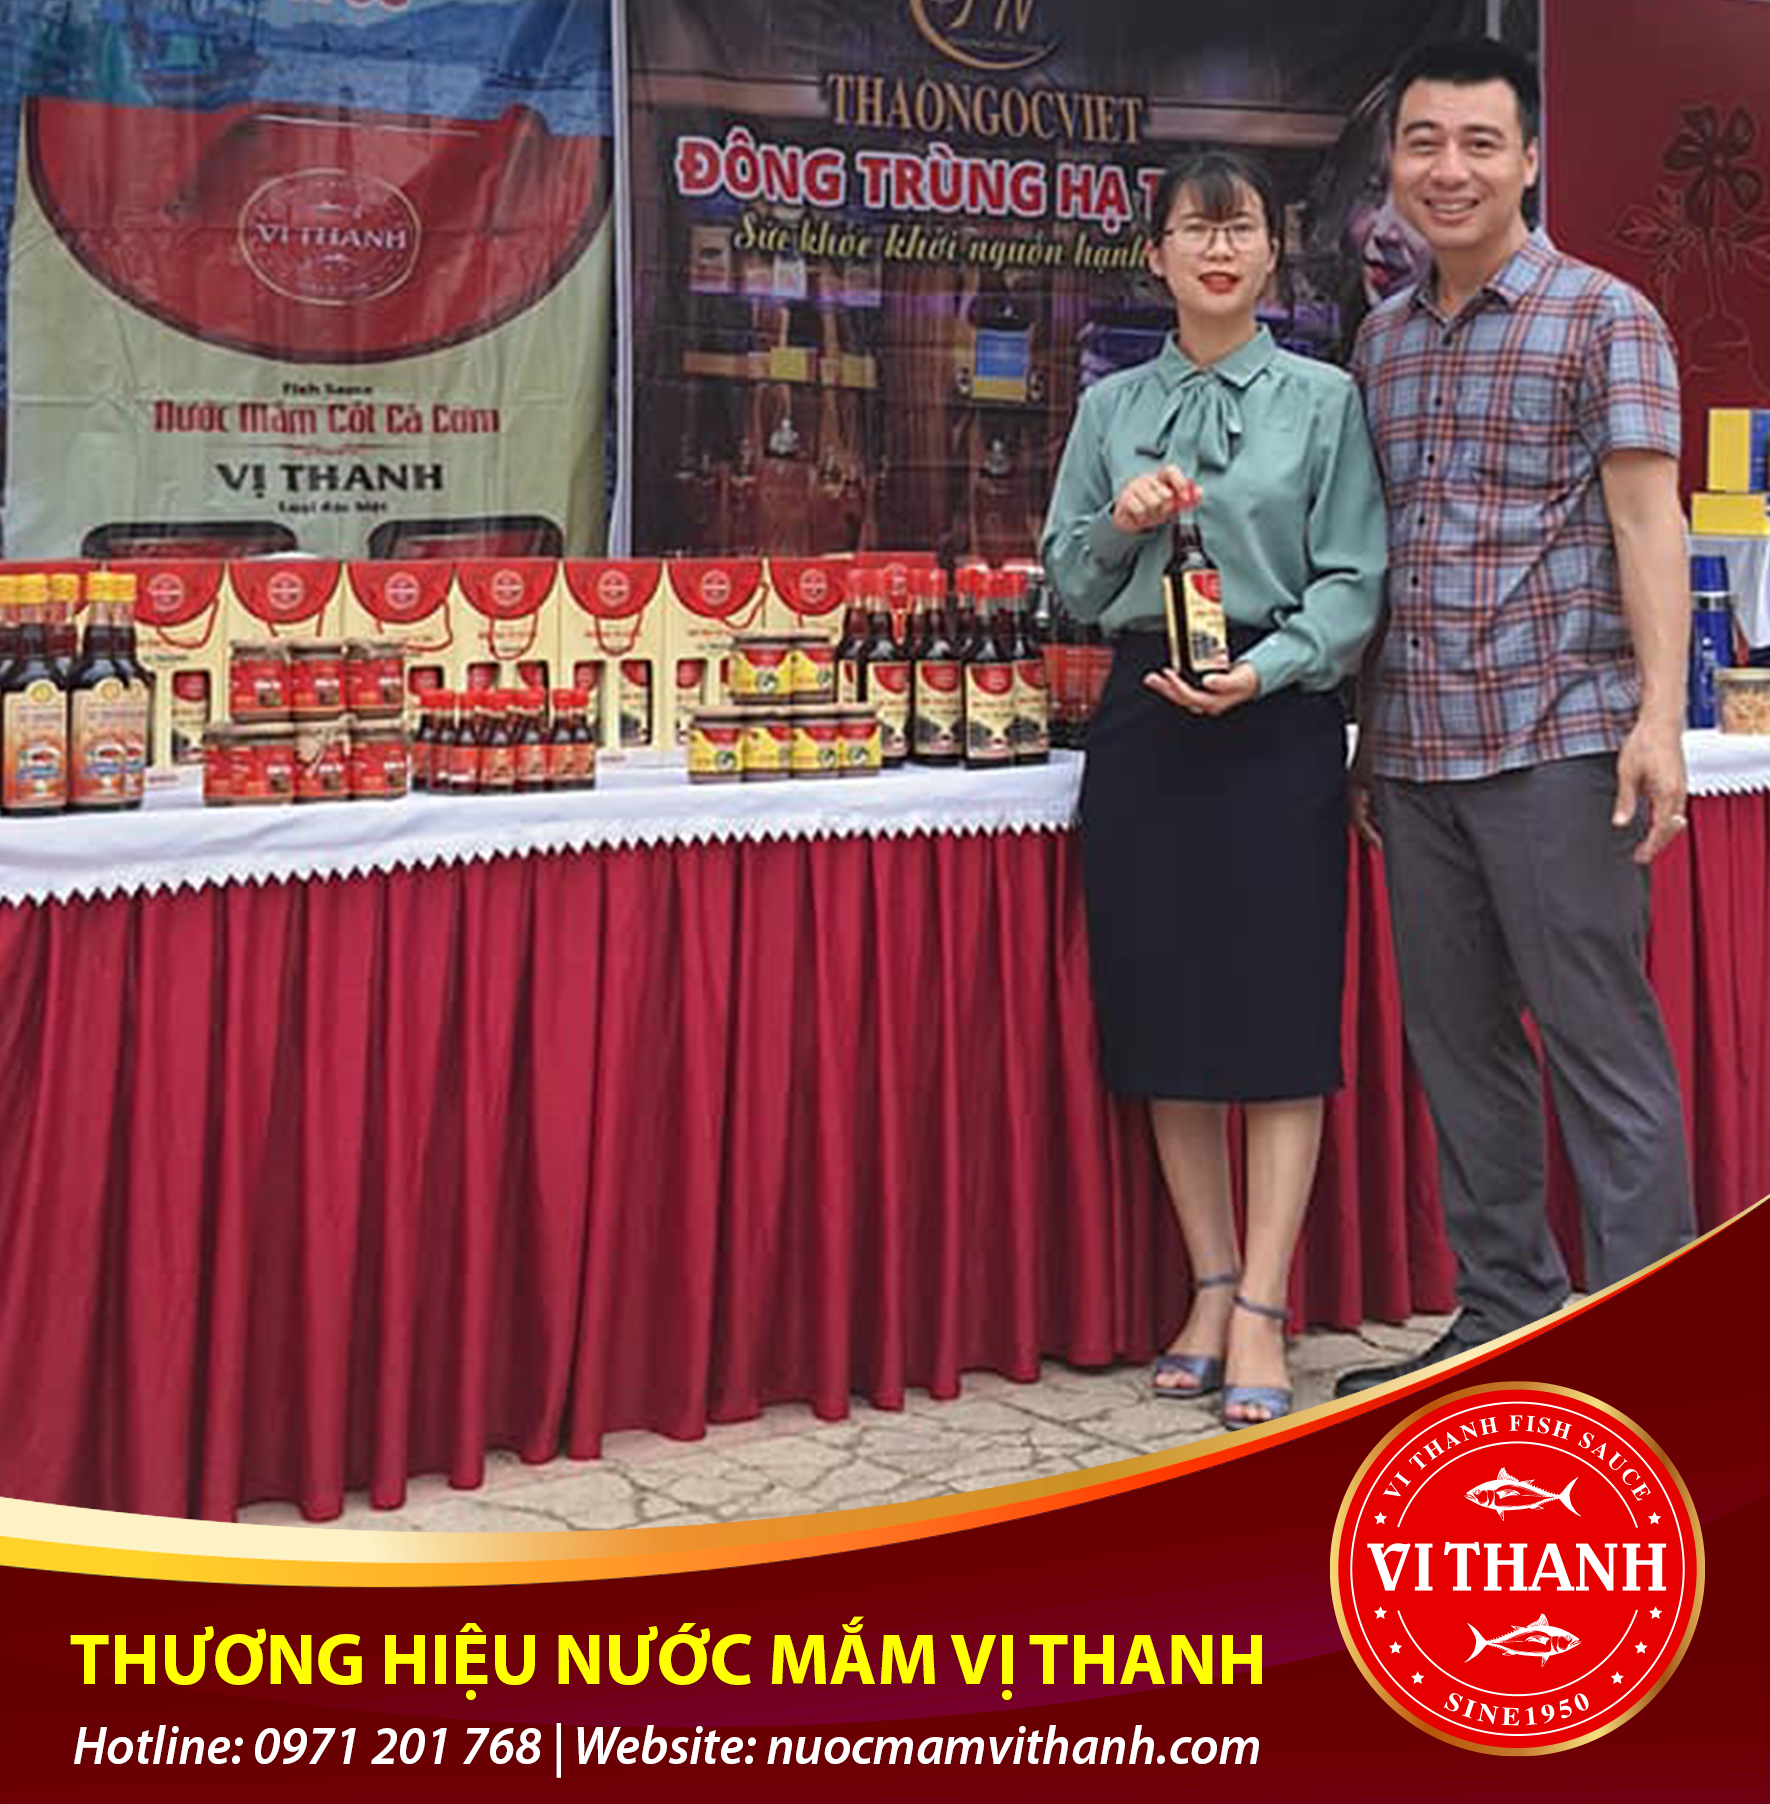 http://nuocmamvithanh.com/admin/uploadpicture/che%20anh_vithanh120d.png